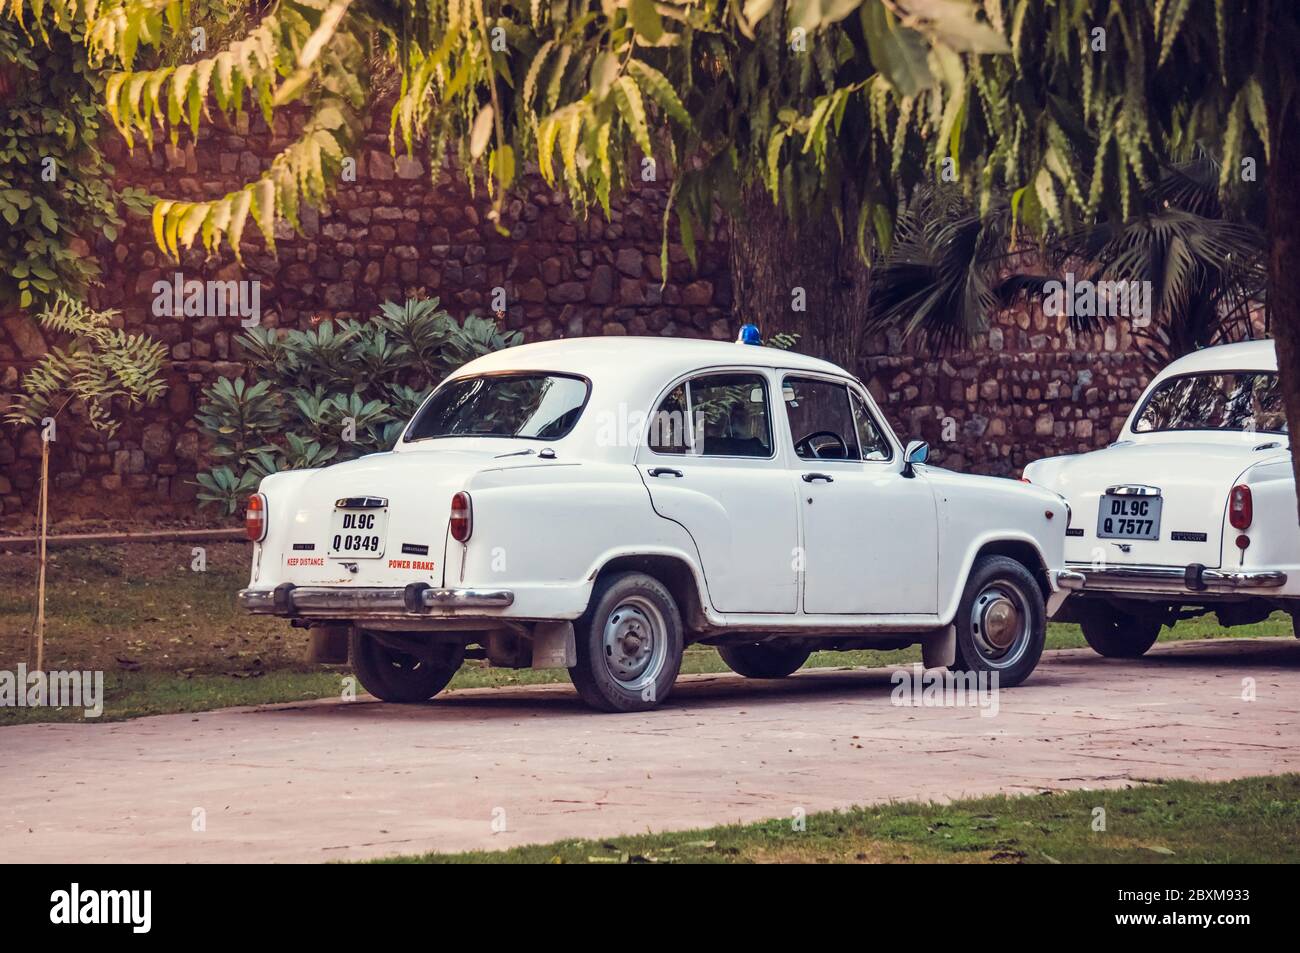 NEW DELHI, INDIA - 05 FEB. 2014 - White Indian retro cars parked in the territory of Red Fort - Lal Qila, one of the main landmarks in New Delhi Stock Photo